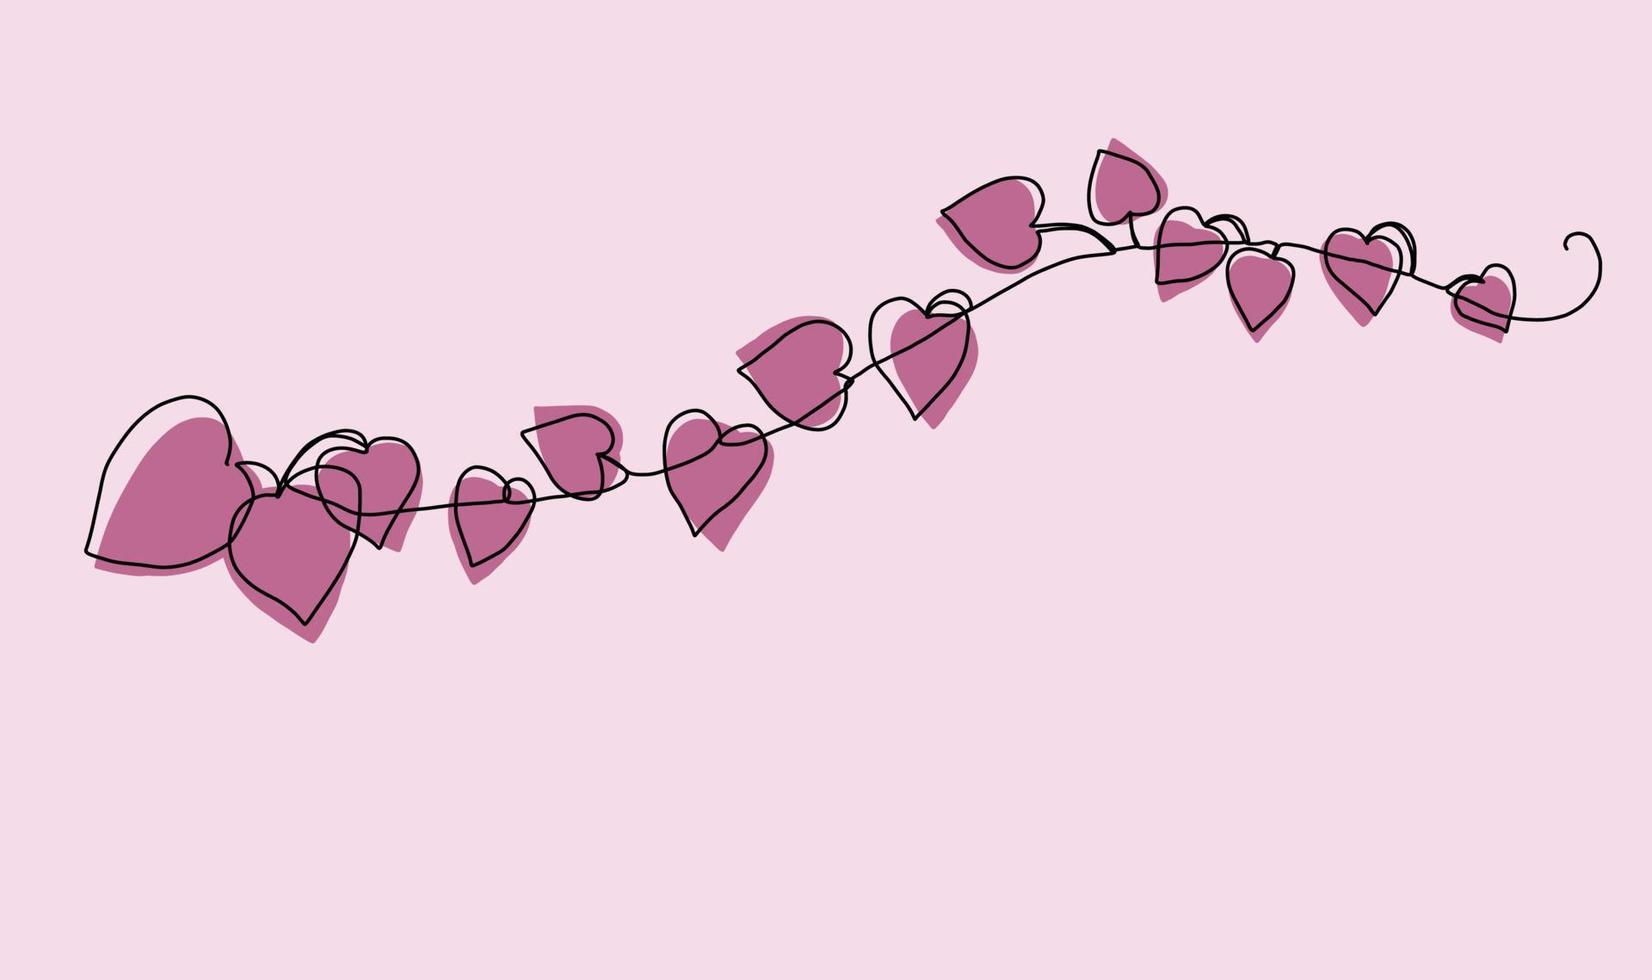 Simplicity ivy continuous line freehand drawing. vector